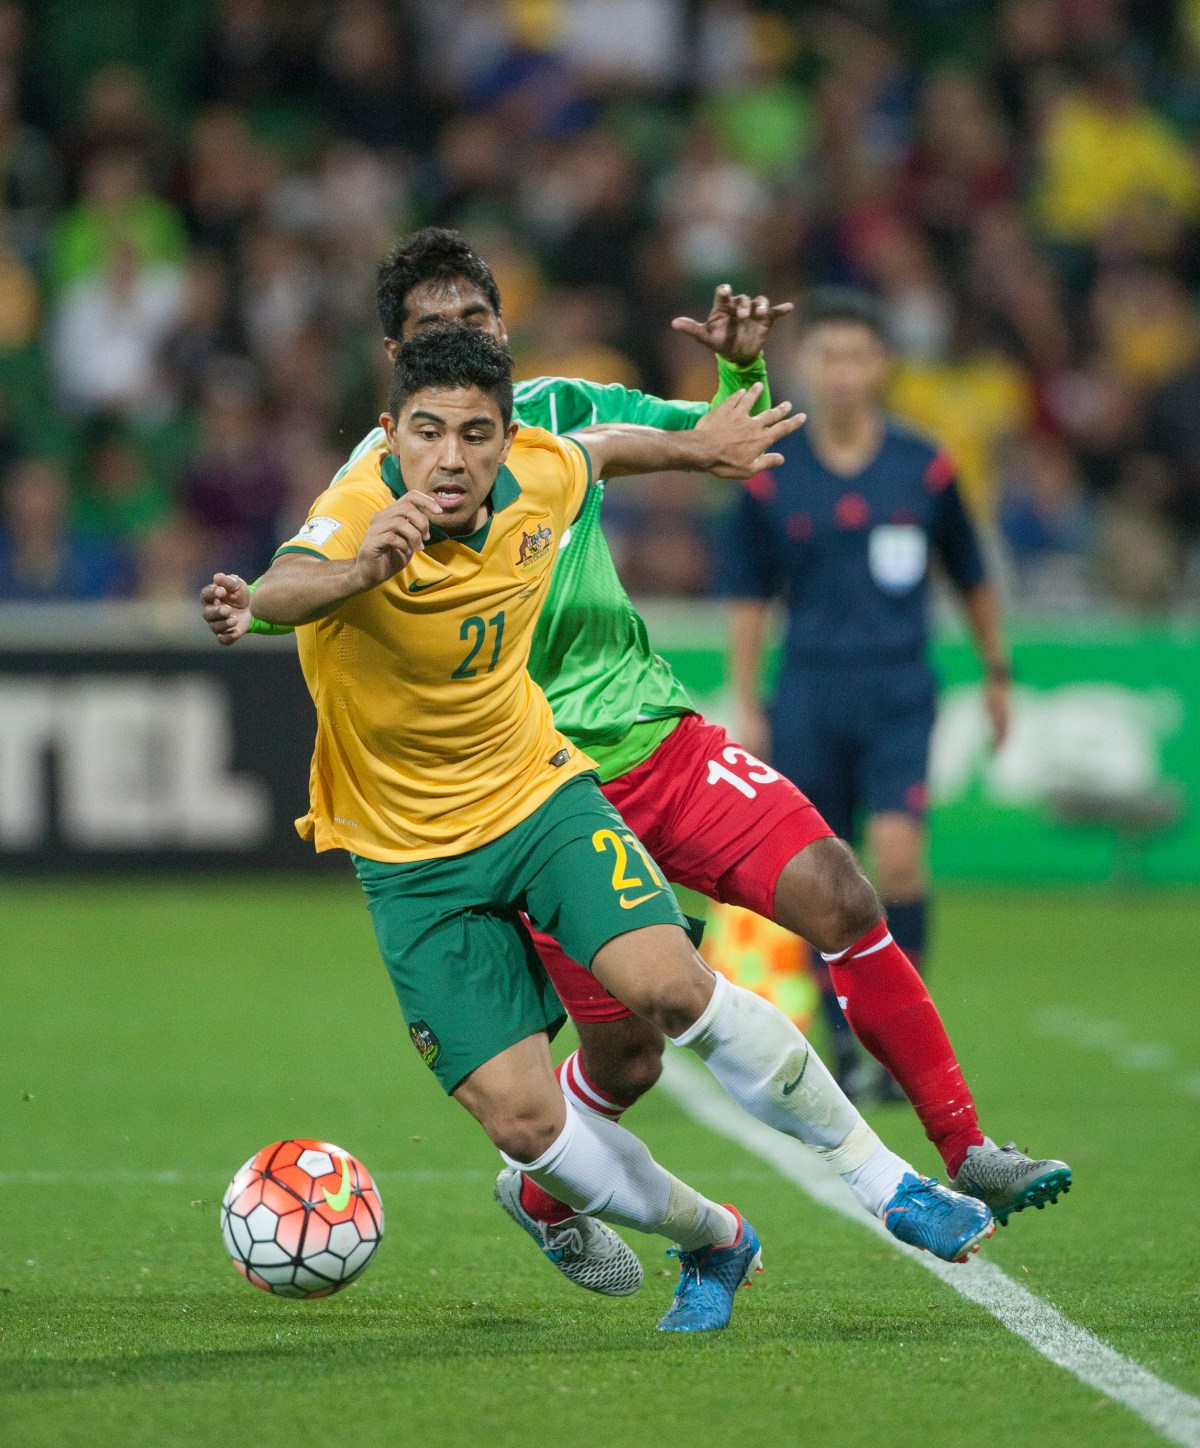 Massimo Luongo for the Socceroos and Monaem Khan Raju for Bangladesh during the World Cup qualifier match between Australia and Bangladesh at NIB Stadium in Perth, Thursday Sept. 3, 2015. (AAP Image/Tony McDonough) NO ARCHIVING, EDITORIAL USE ONLY